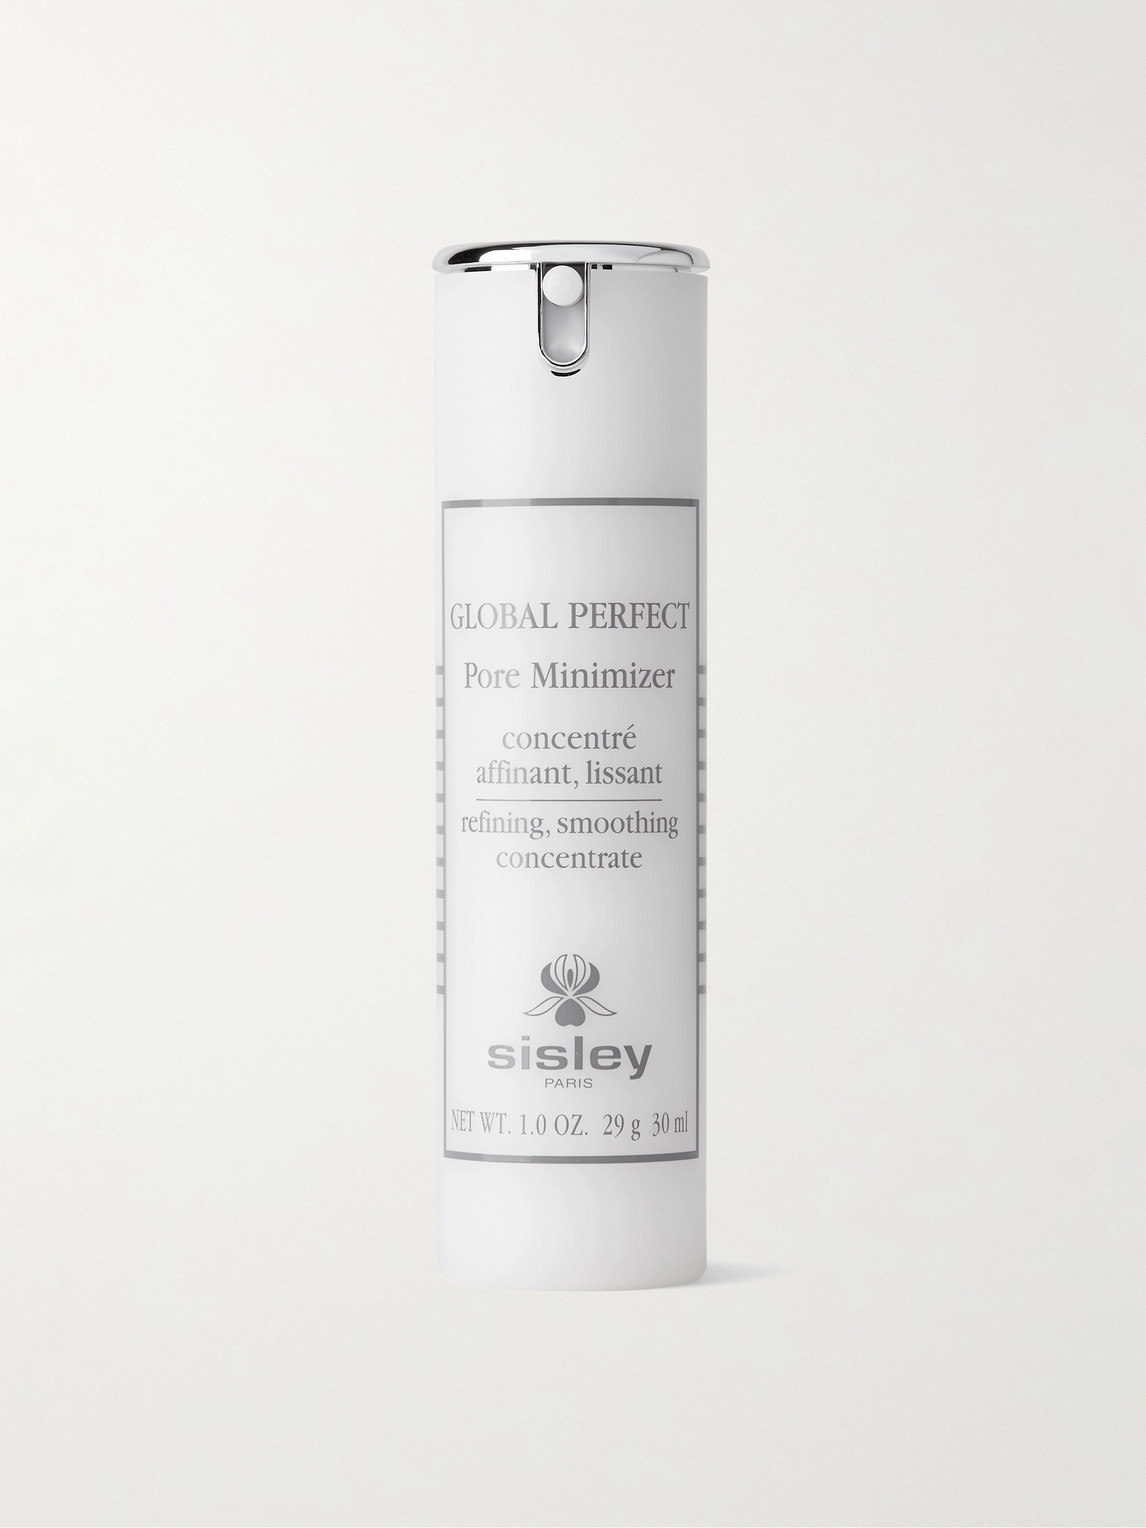 Sisley Paris Global Perfect Pore Minimizer Concentrate, 30ml - One Size In Colorless